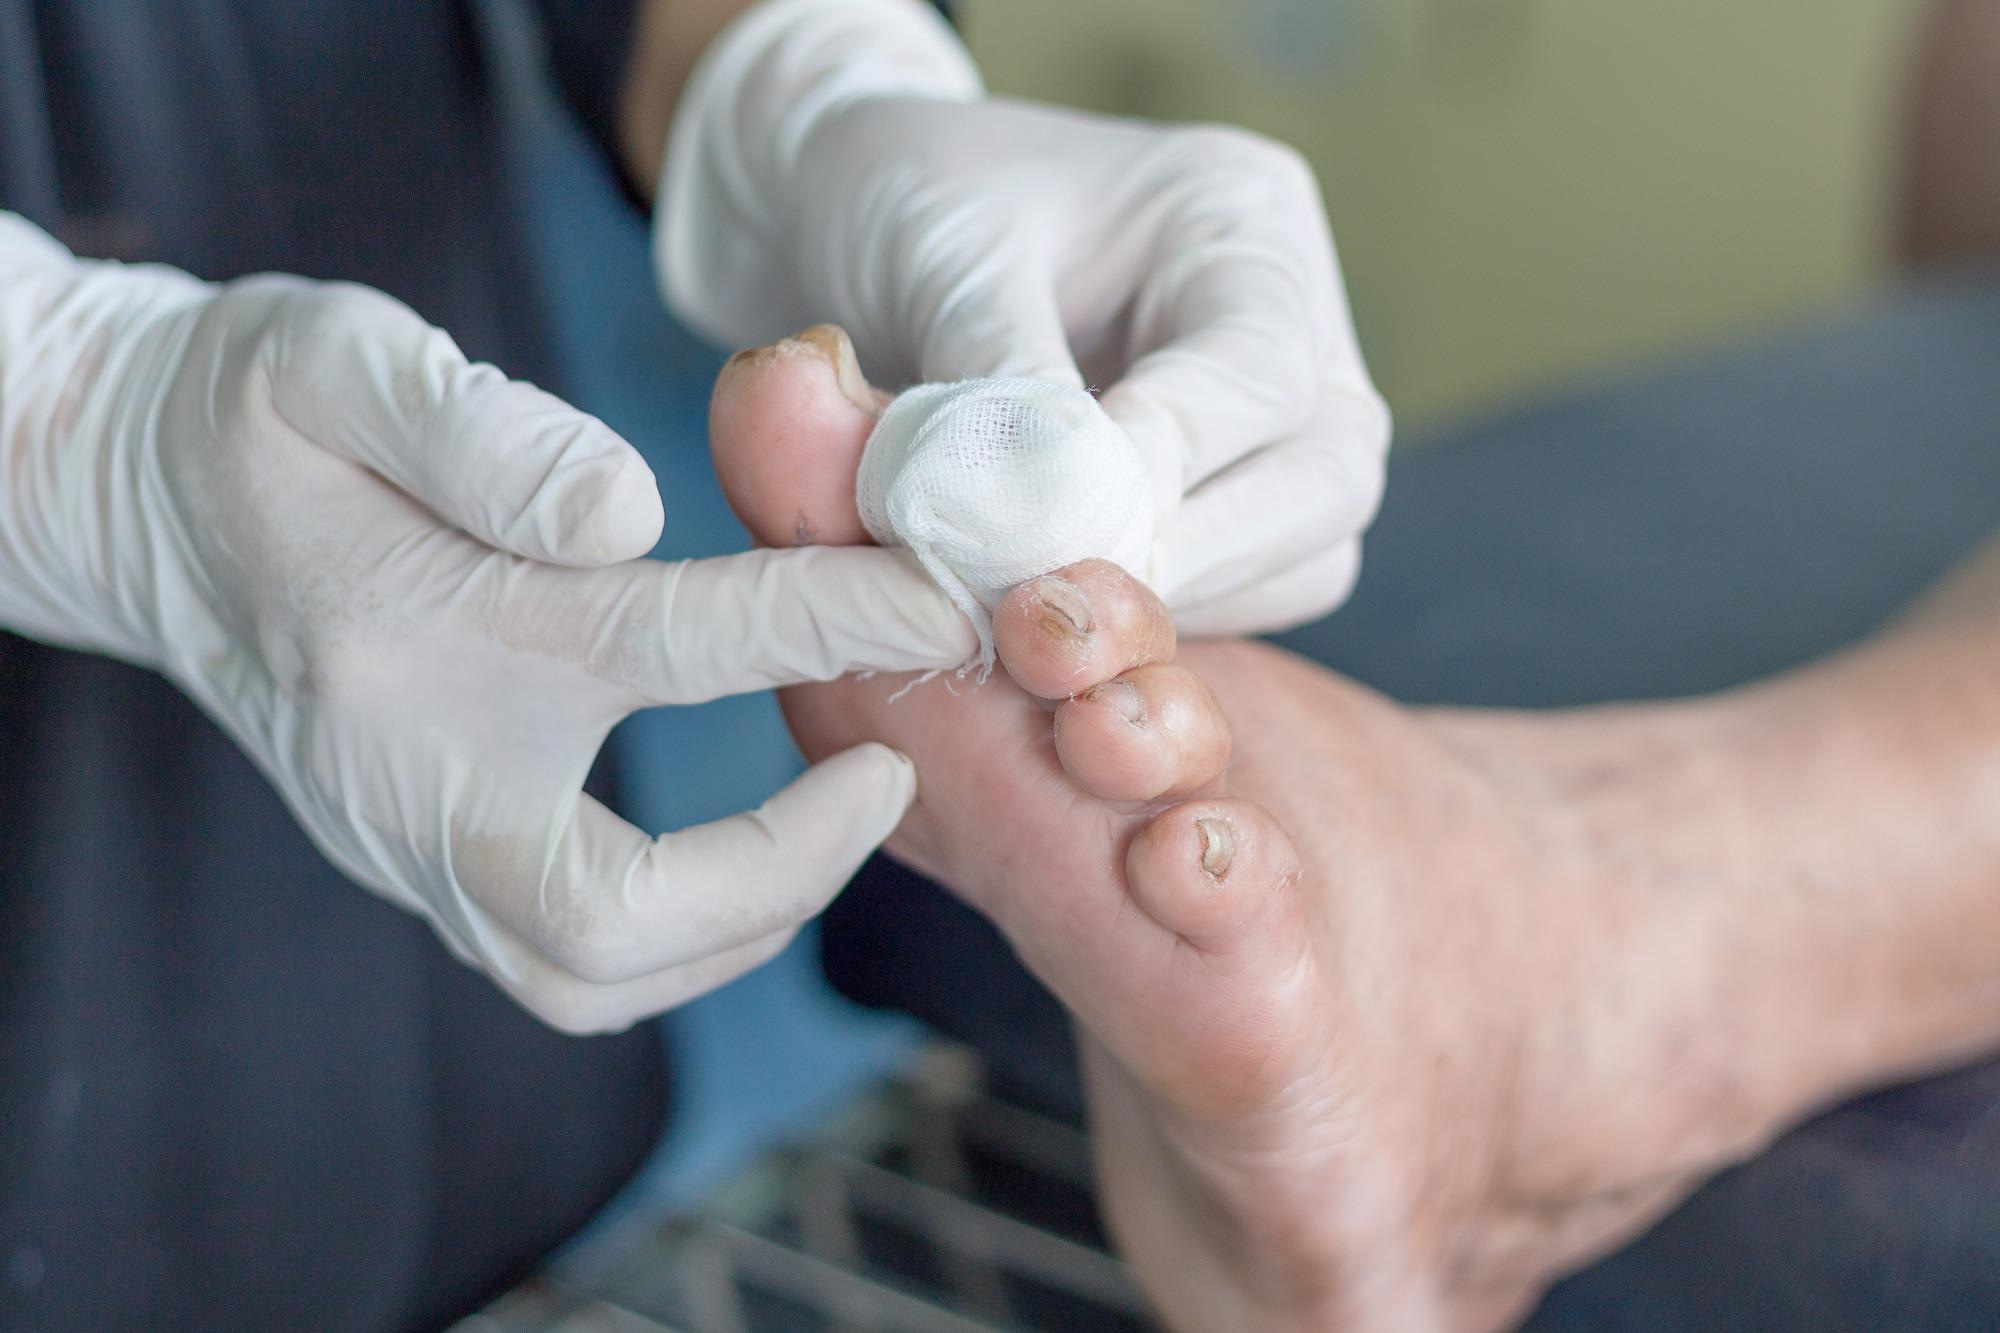 Study: Association of Race, Ethnicity, and Rurality With Major Leg Amputation or Death Among Medicare Beneficiaries Hospitalized With Diabetic Foot Ulcers. Image Credit: kirov1976 / Shutterstock